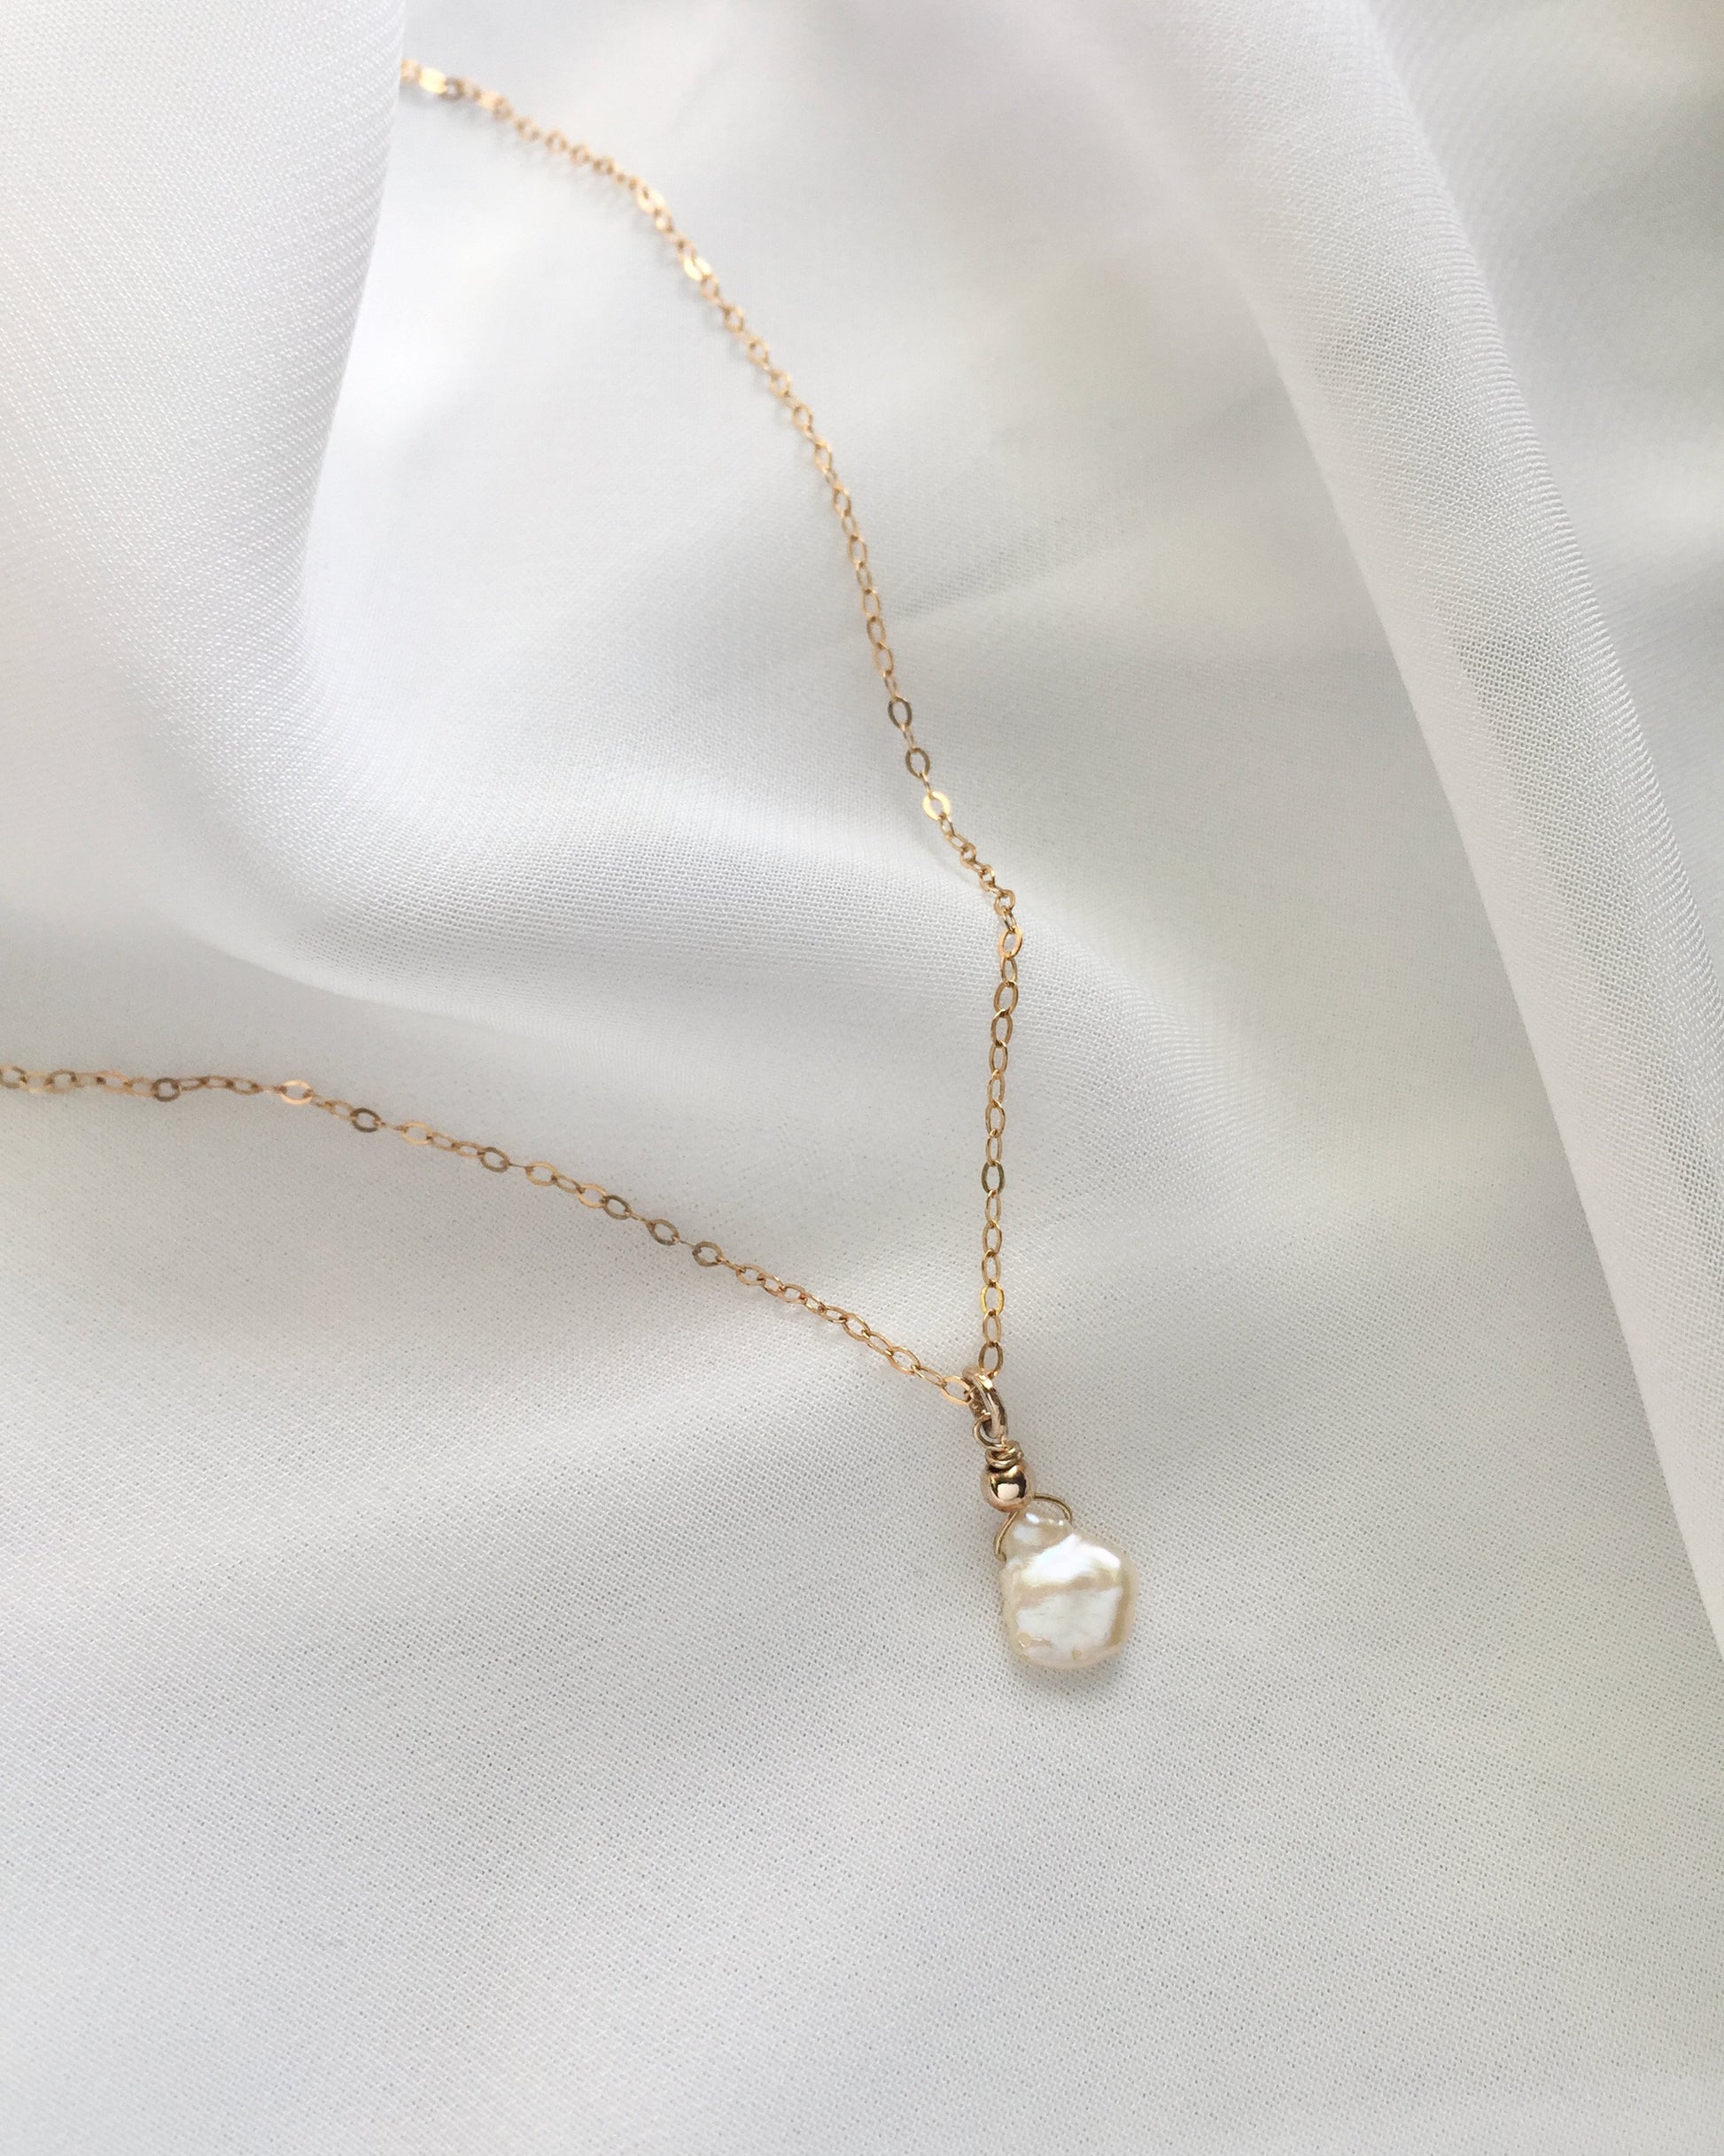 40th Birthday Necklace | 40th Birthday Gifts For Women Jewelry | Delicate Pearl Necklace In Gold Filled or Sterling Silver | IB Jewelry